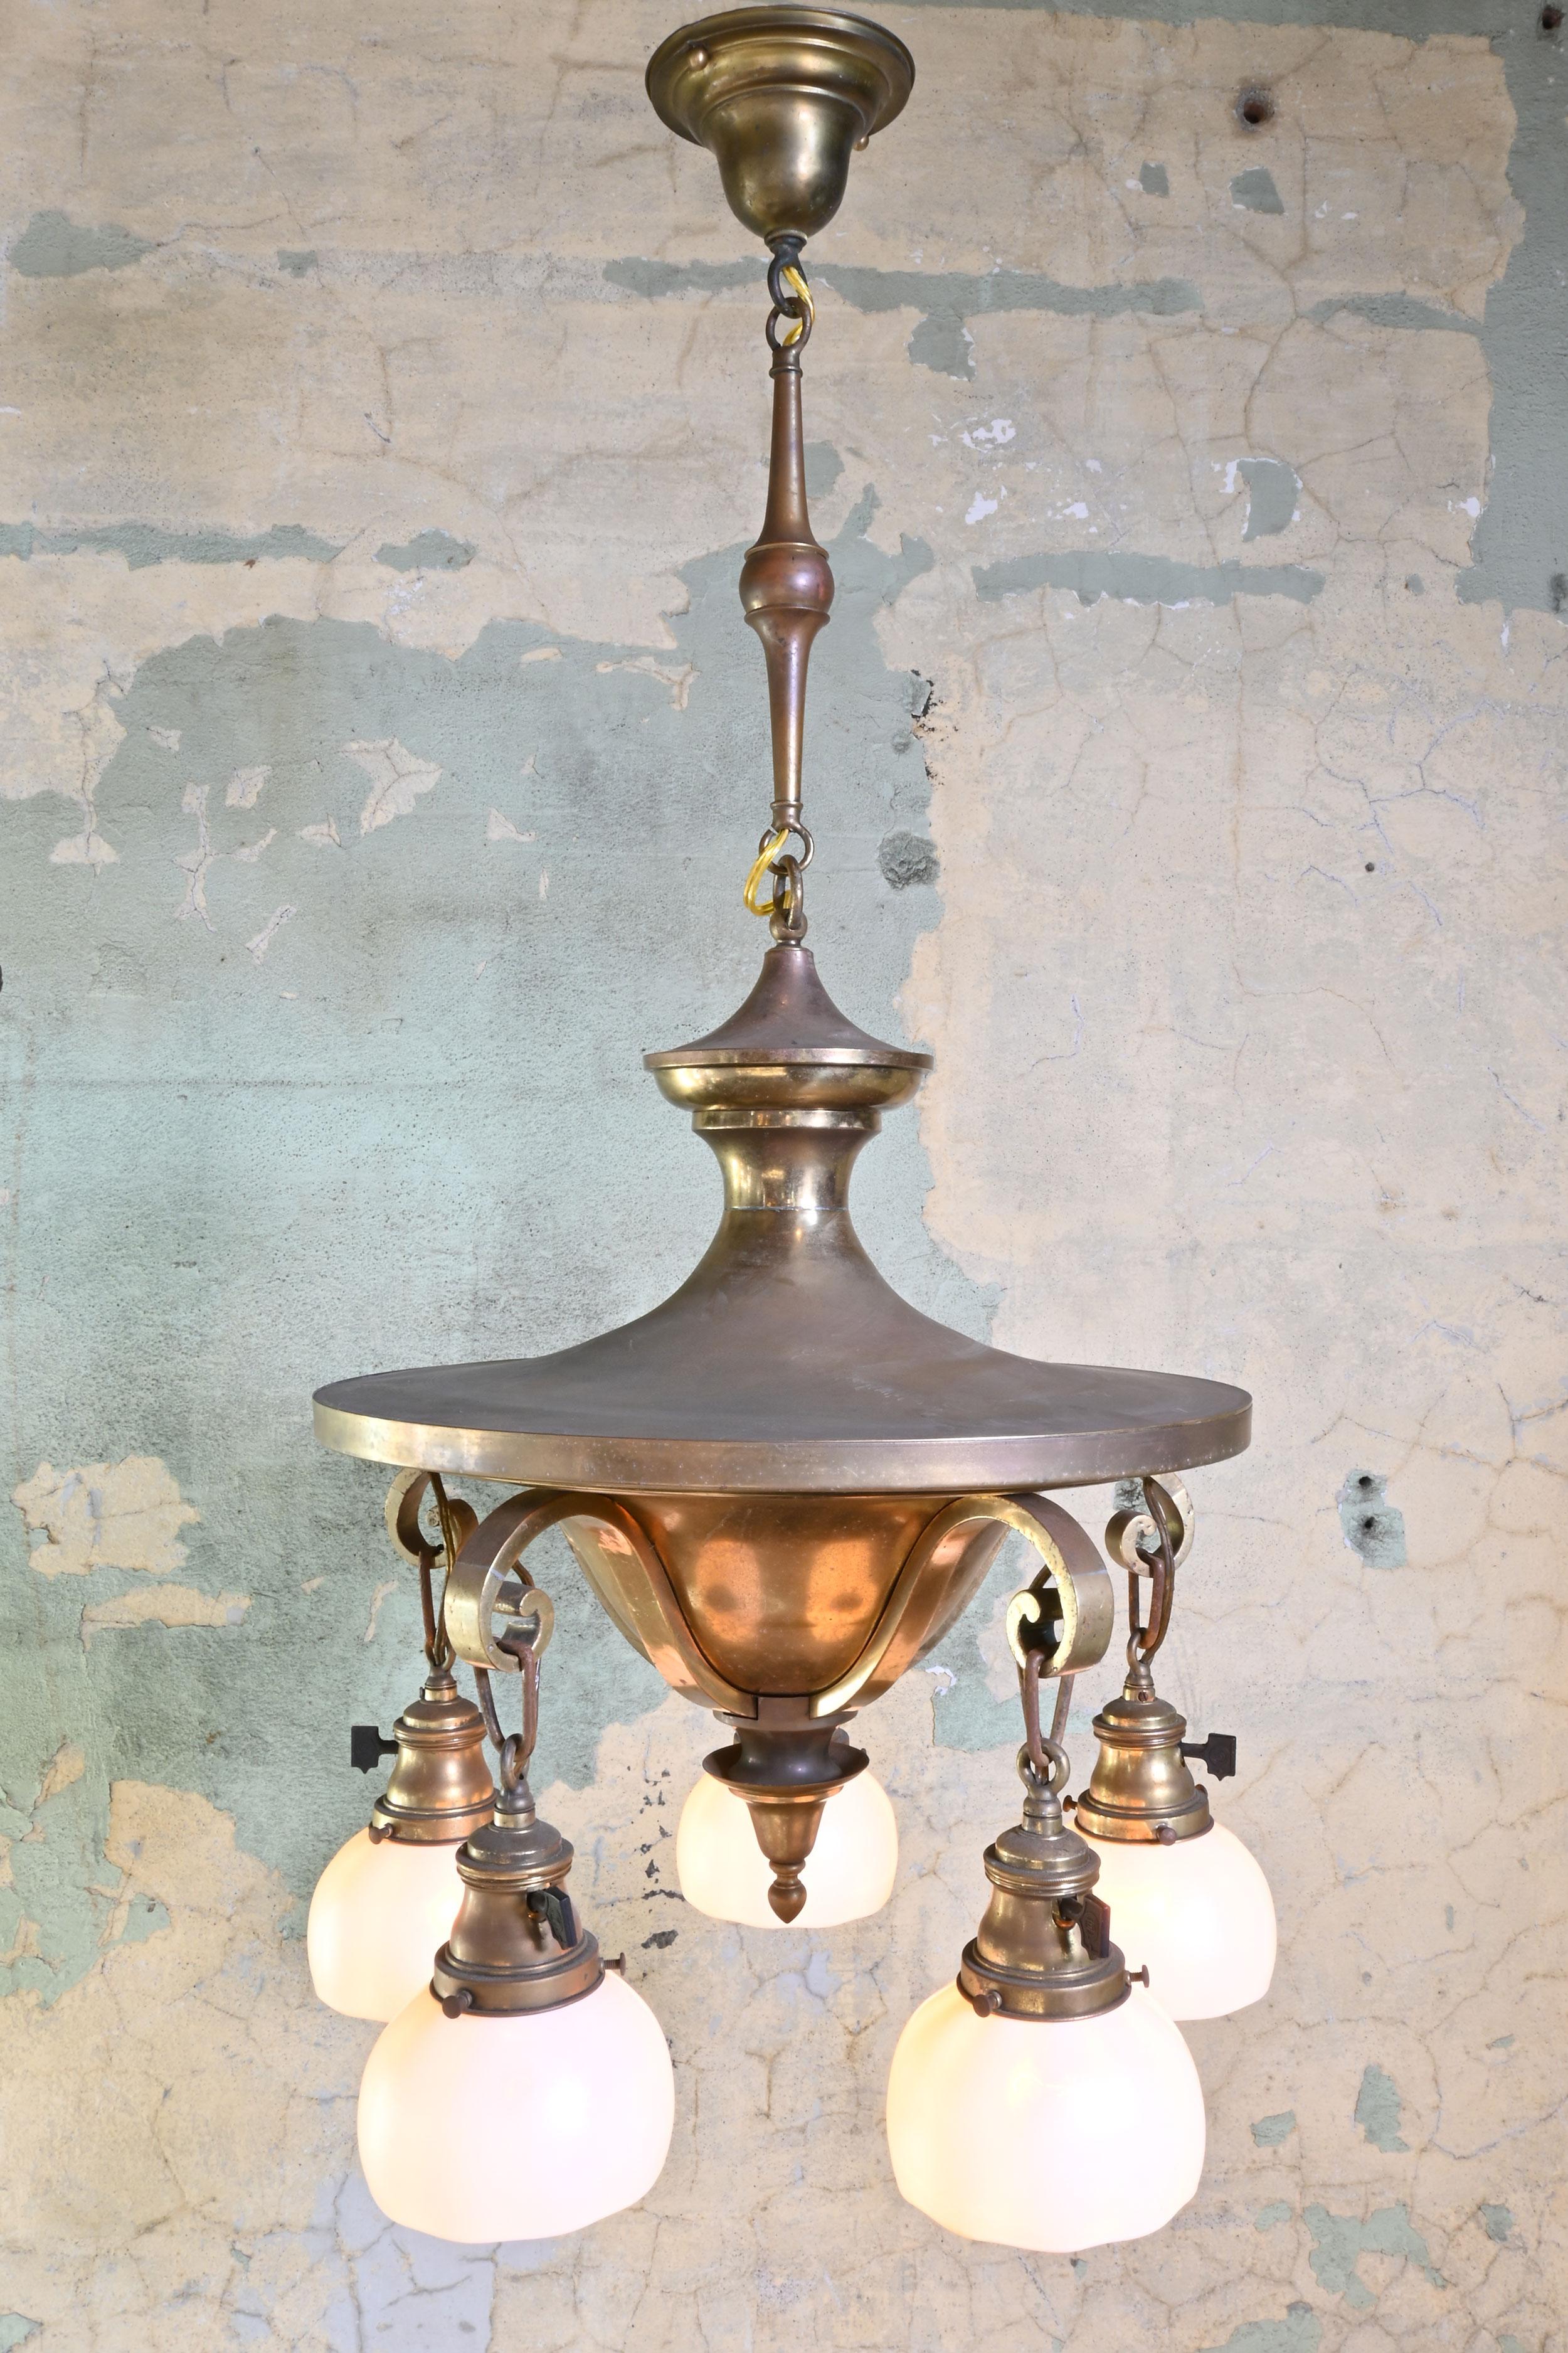 This Arts & Crafts fixture is of a circular design, lending it to be of a more classical design inline with other pan fixtures. This 5 light features Steuben Calcite shades that look white but give off a pink glow with the yellow/orange incandescent